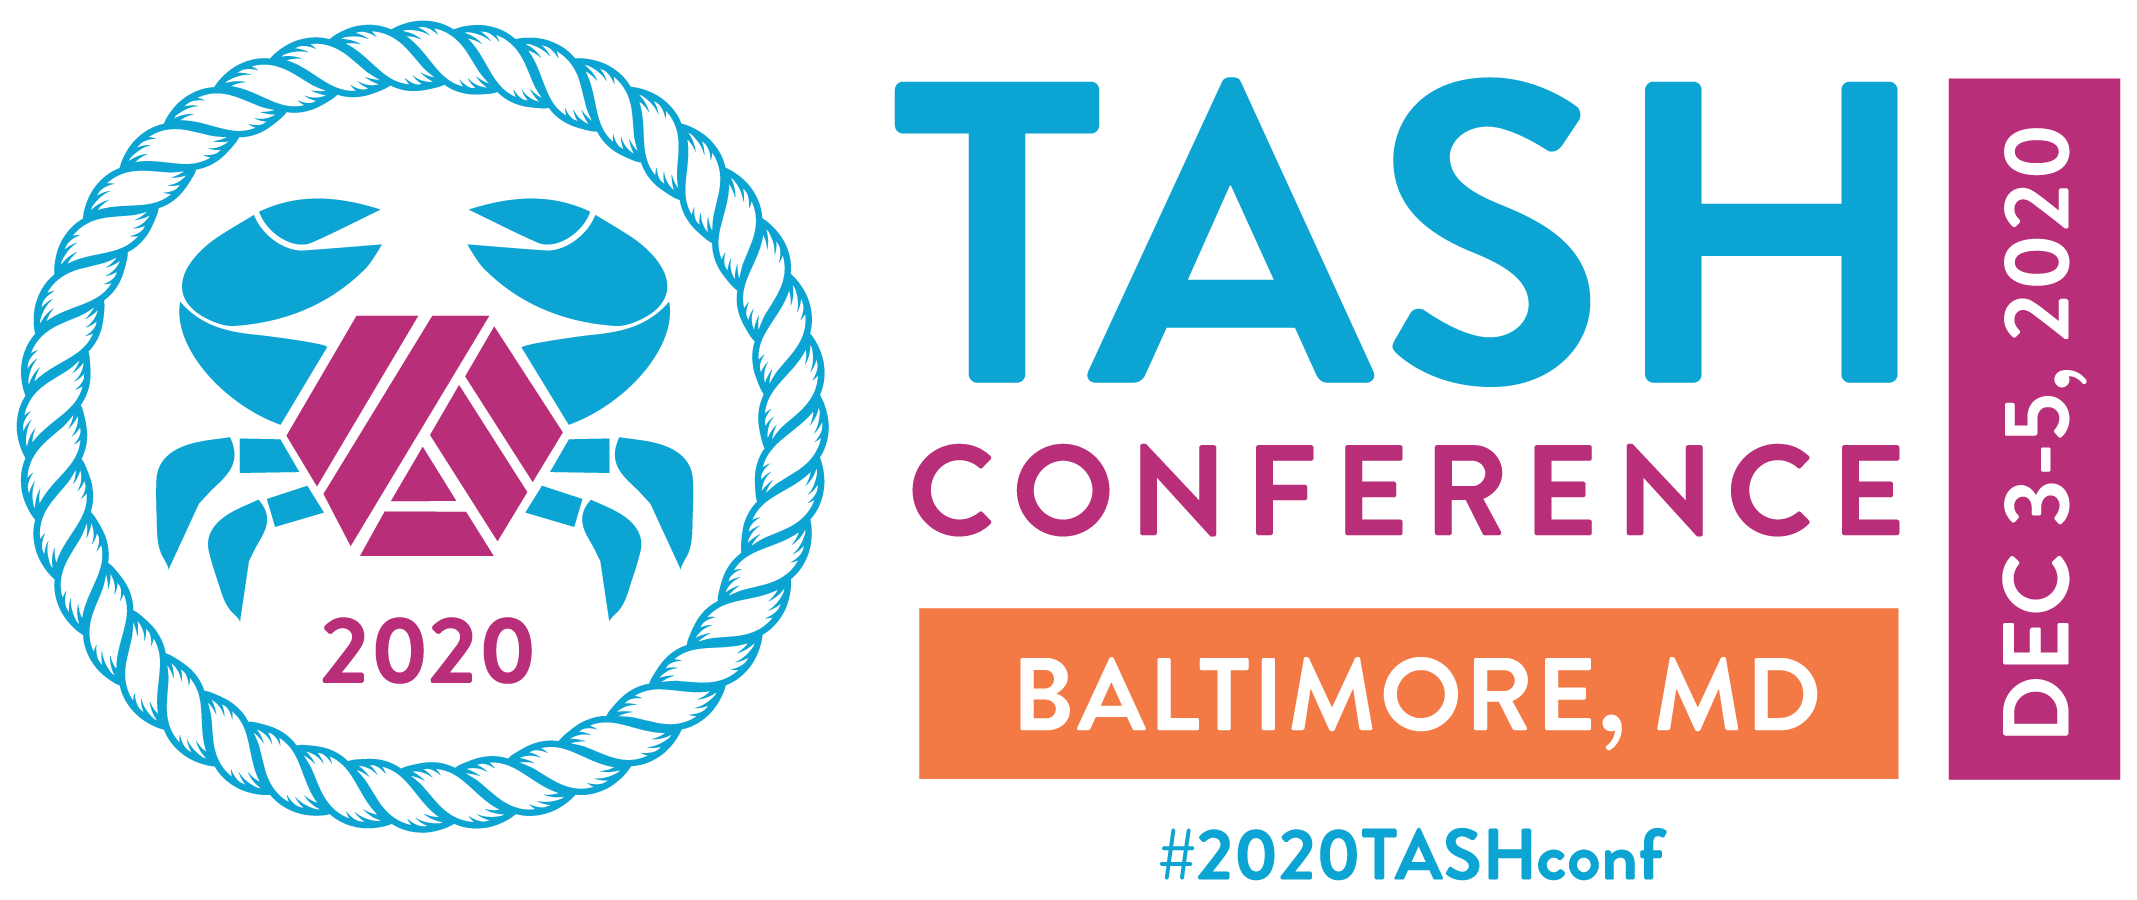 The Baltimore 2020 TASH Conference logo: an illustration of a crab with blue pinchers and legs sprouting from a purple version to the TASH Möbius strip.